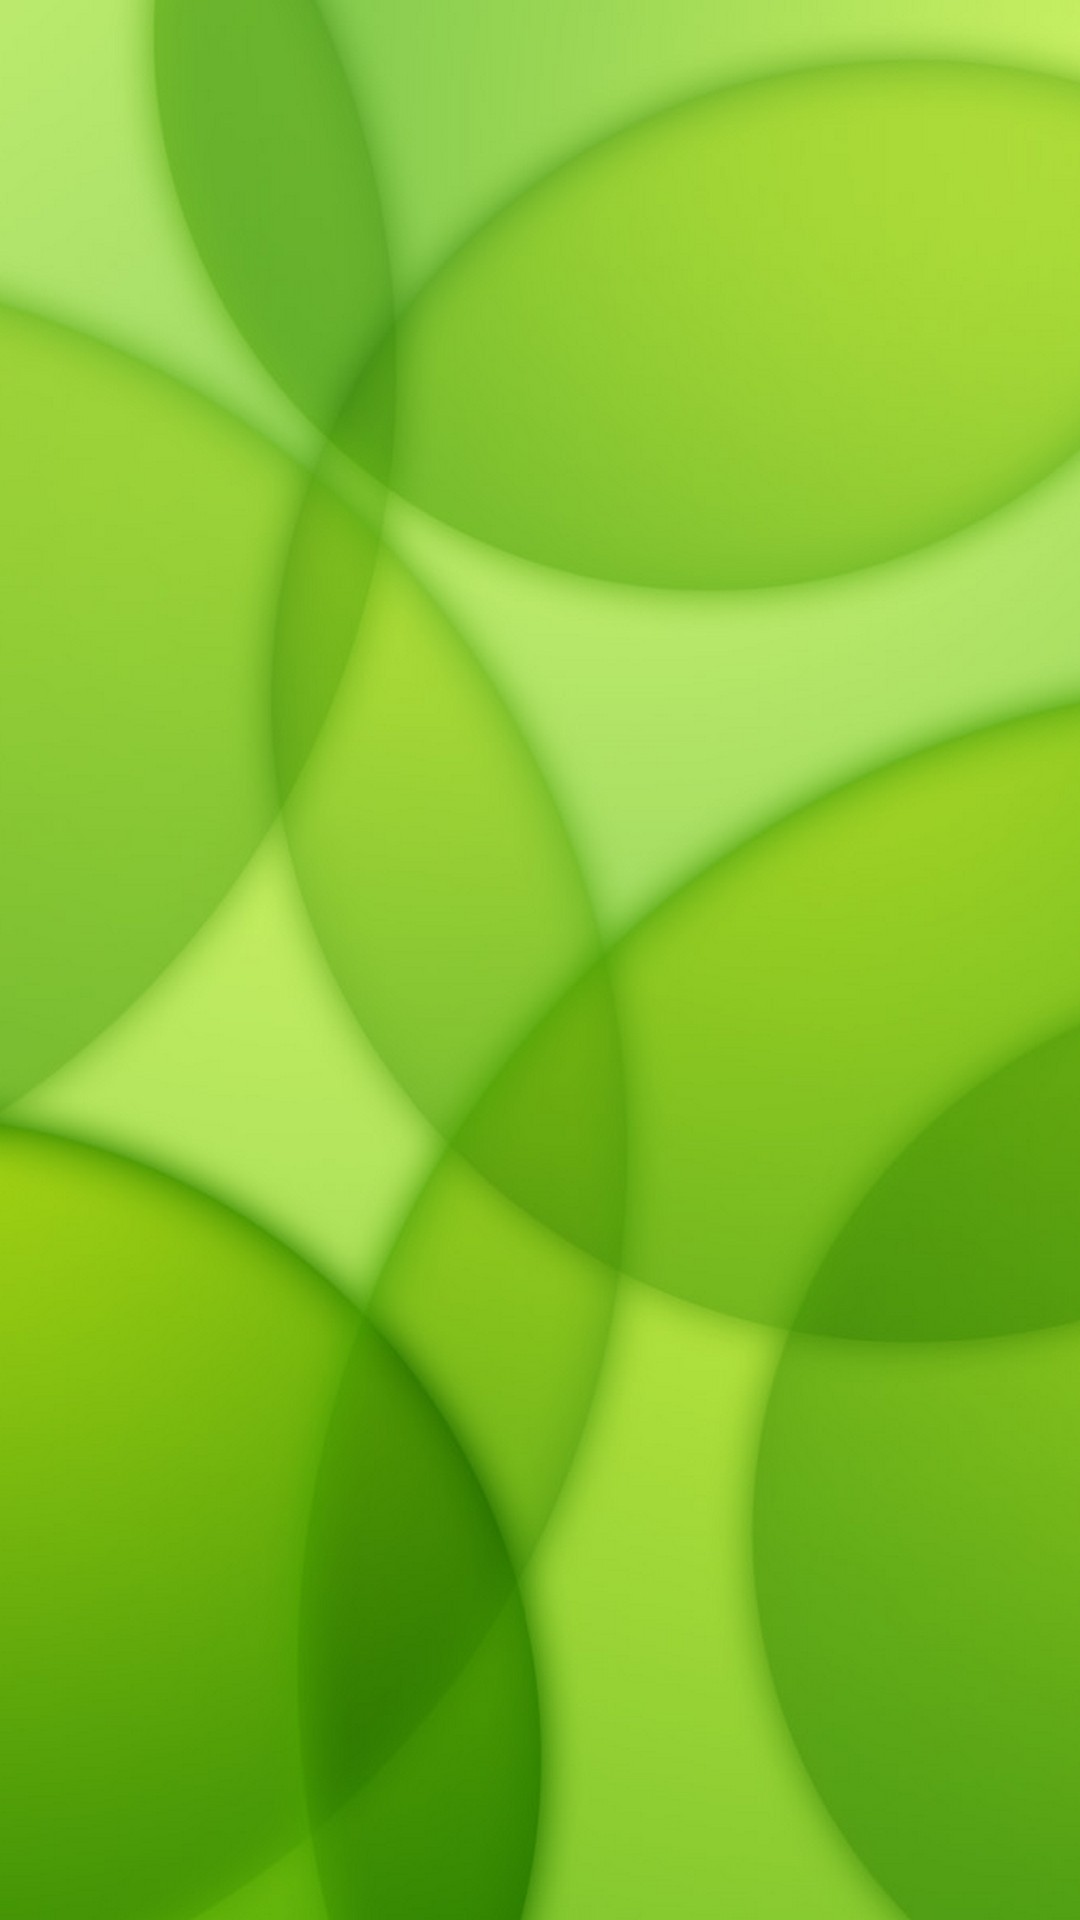 Android Wallpaper Lime Green with image resolution 1080x1920 pixel. You can make this wallpaper for your Android backgrounds, Tablet, Smartphones Screensavers and Mobile Phone Lock Screen